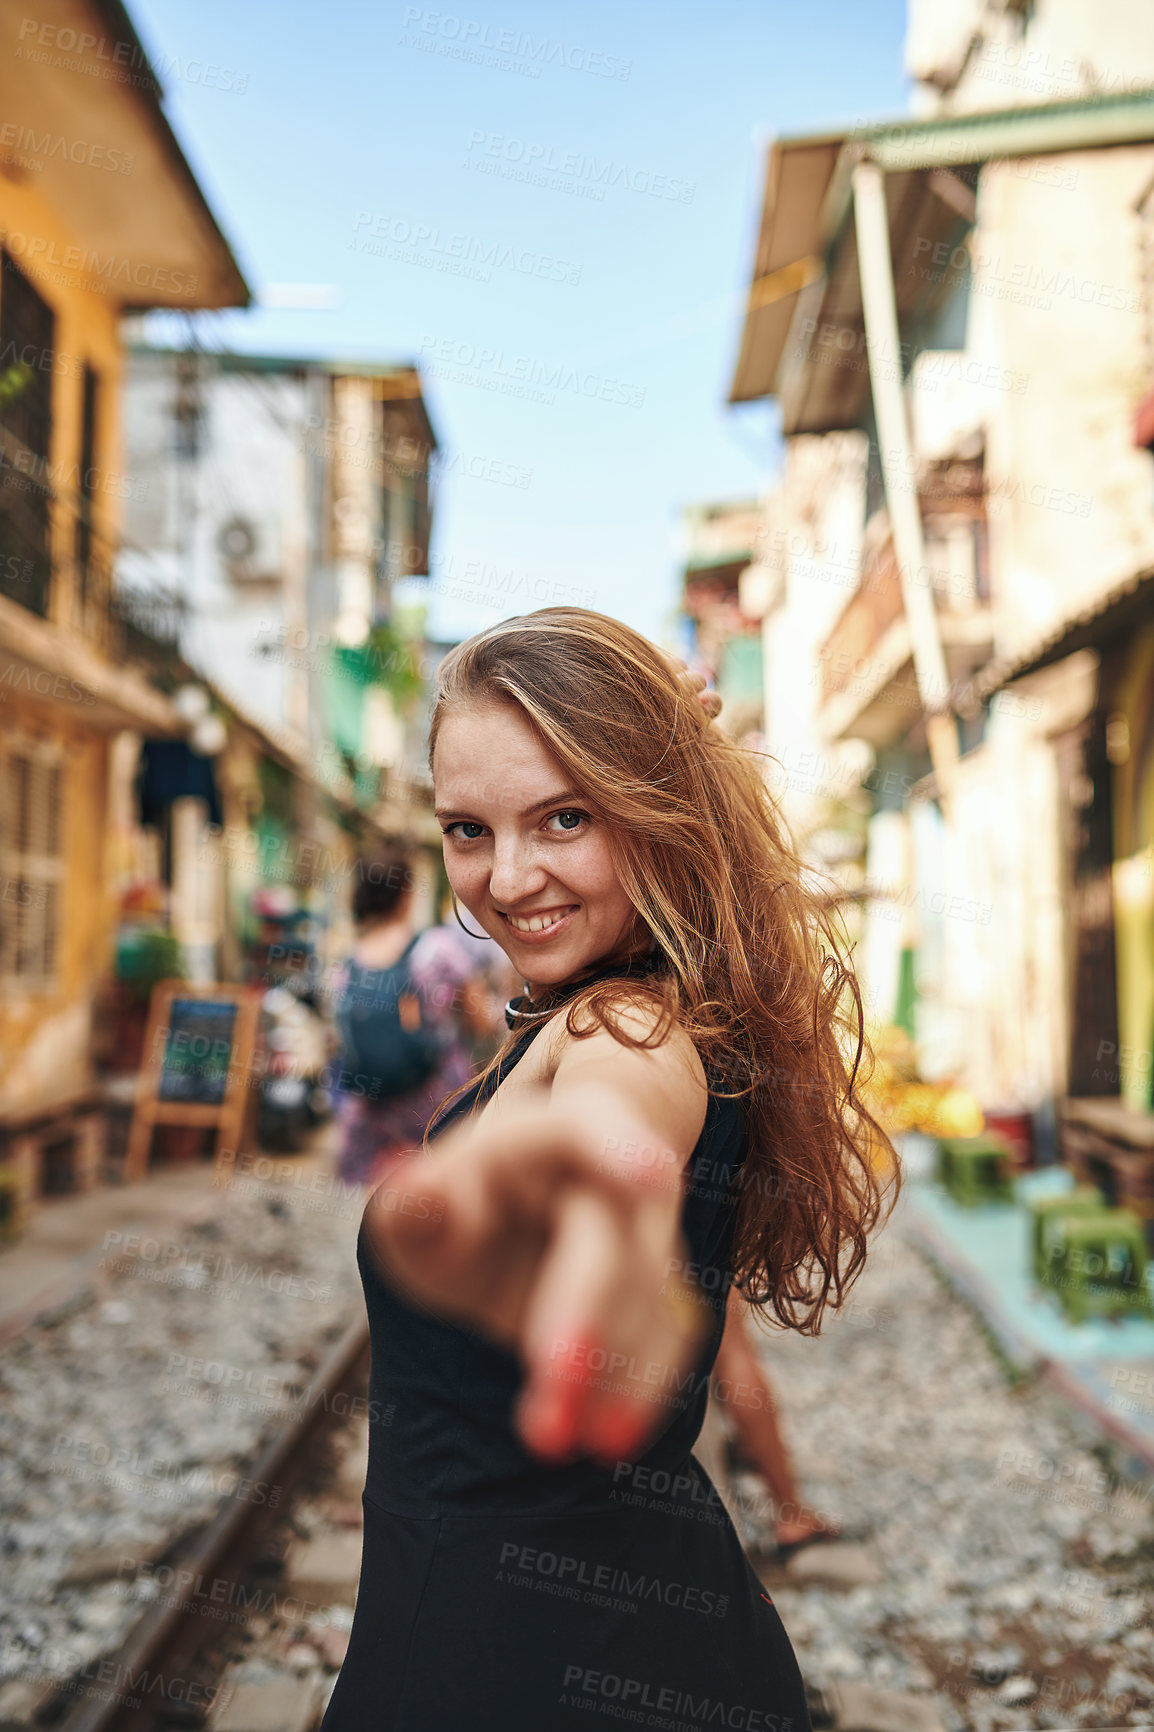 Buy stock photo Shot of a beautiful young woman exploring a foreign city